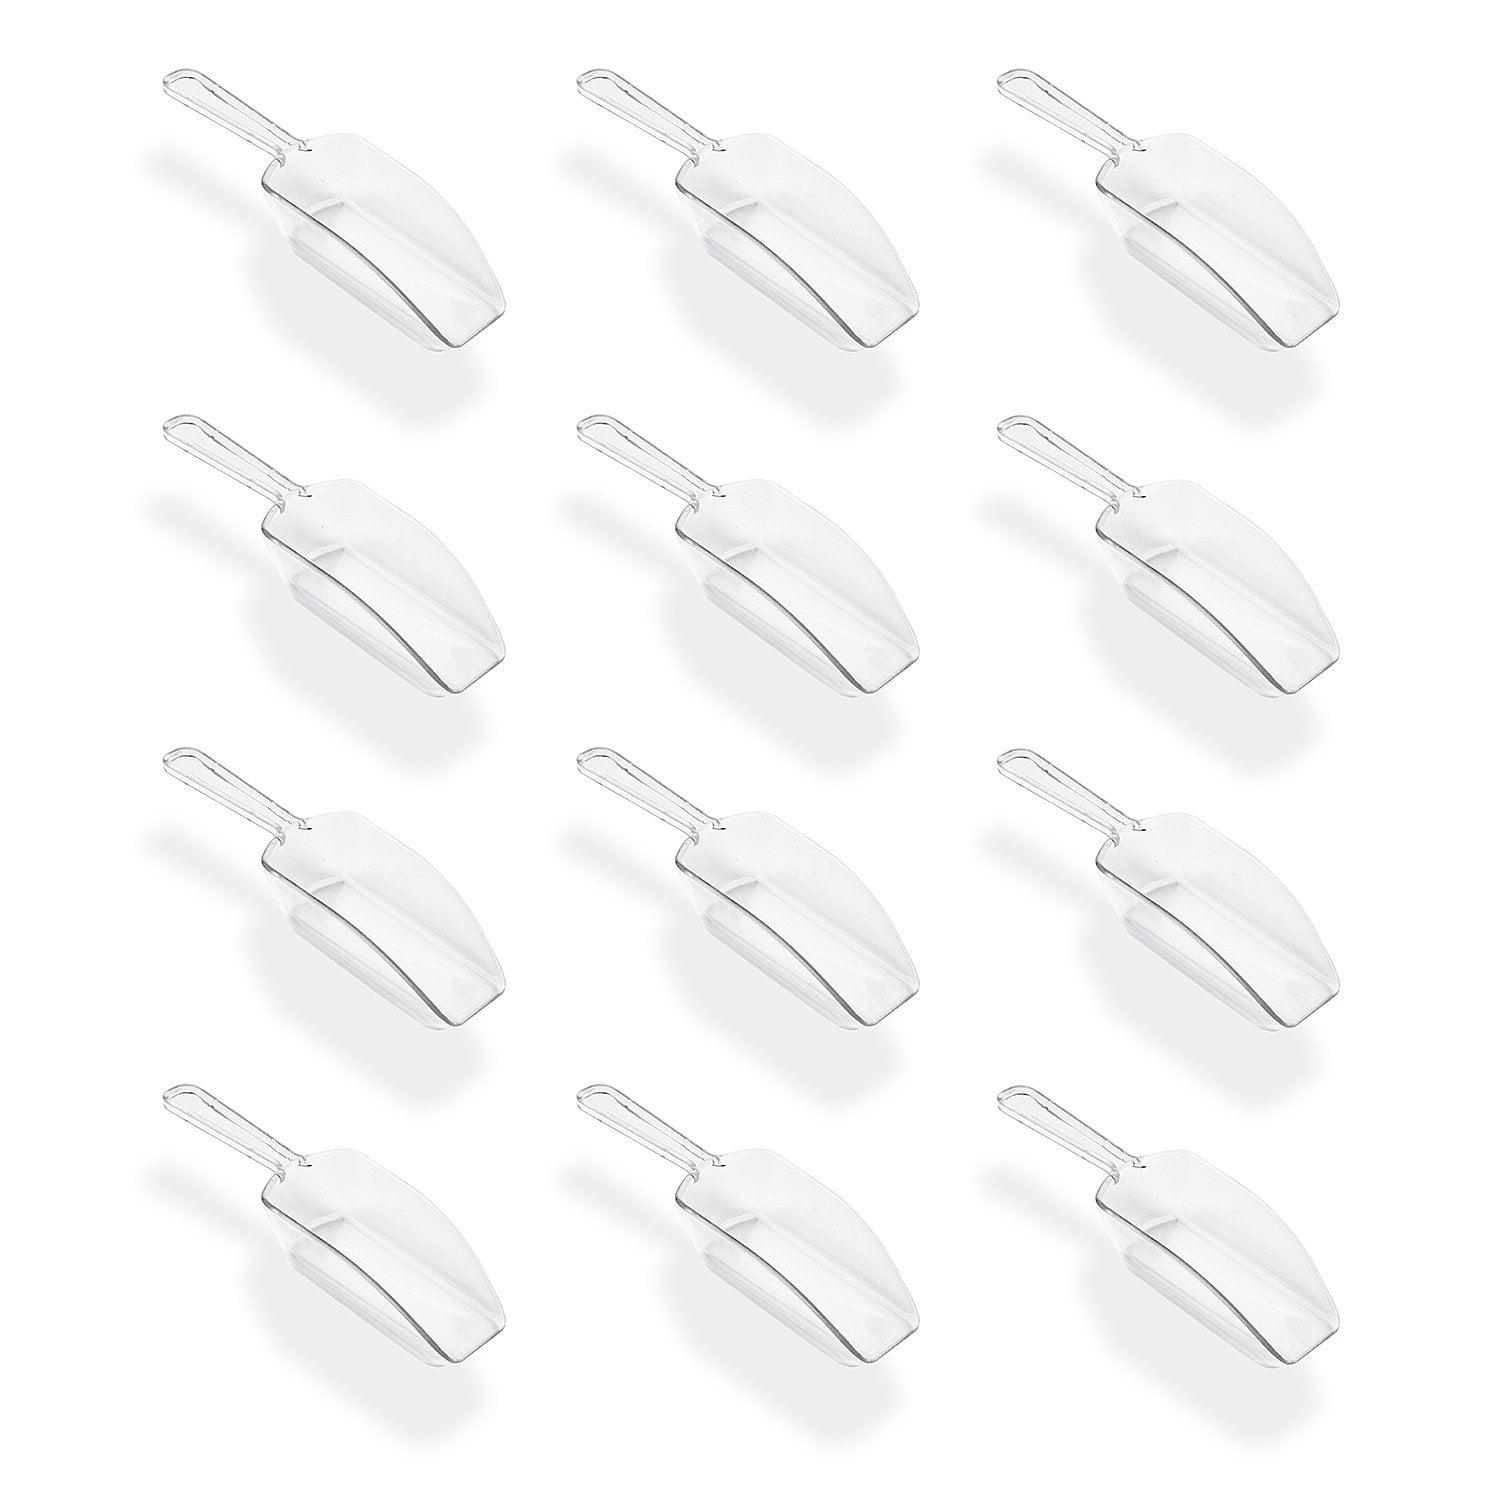 6 Pack  6 Clear Disposable Kitchen Popcorn Candy Scoops, Plastic